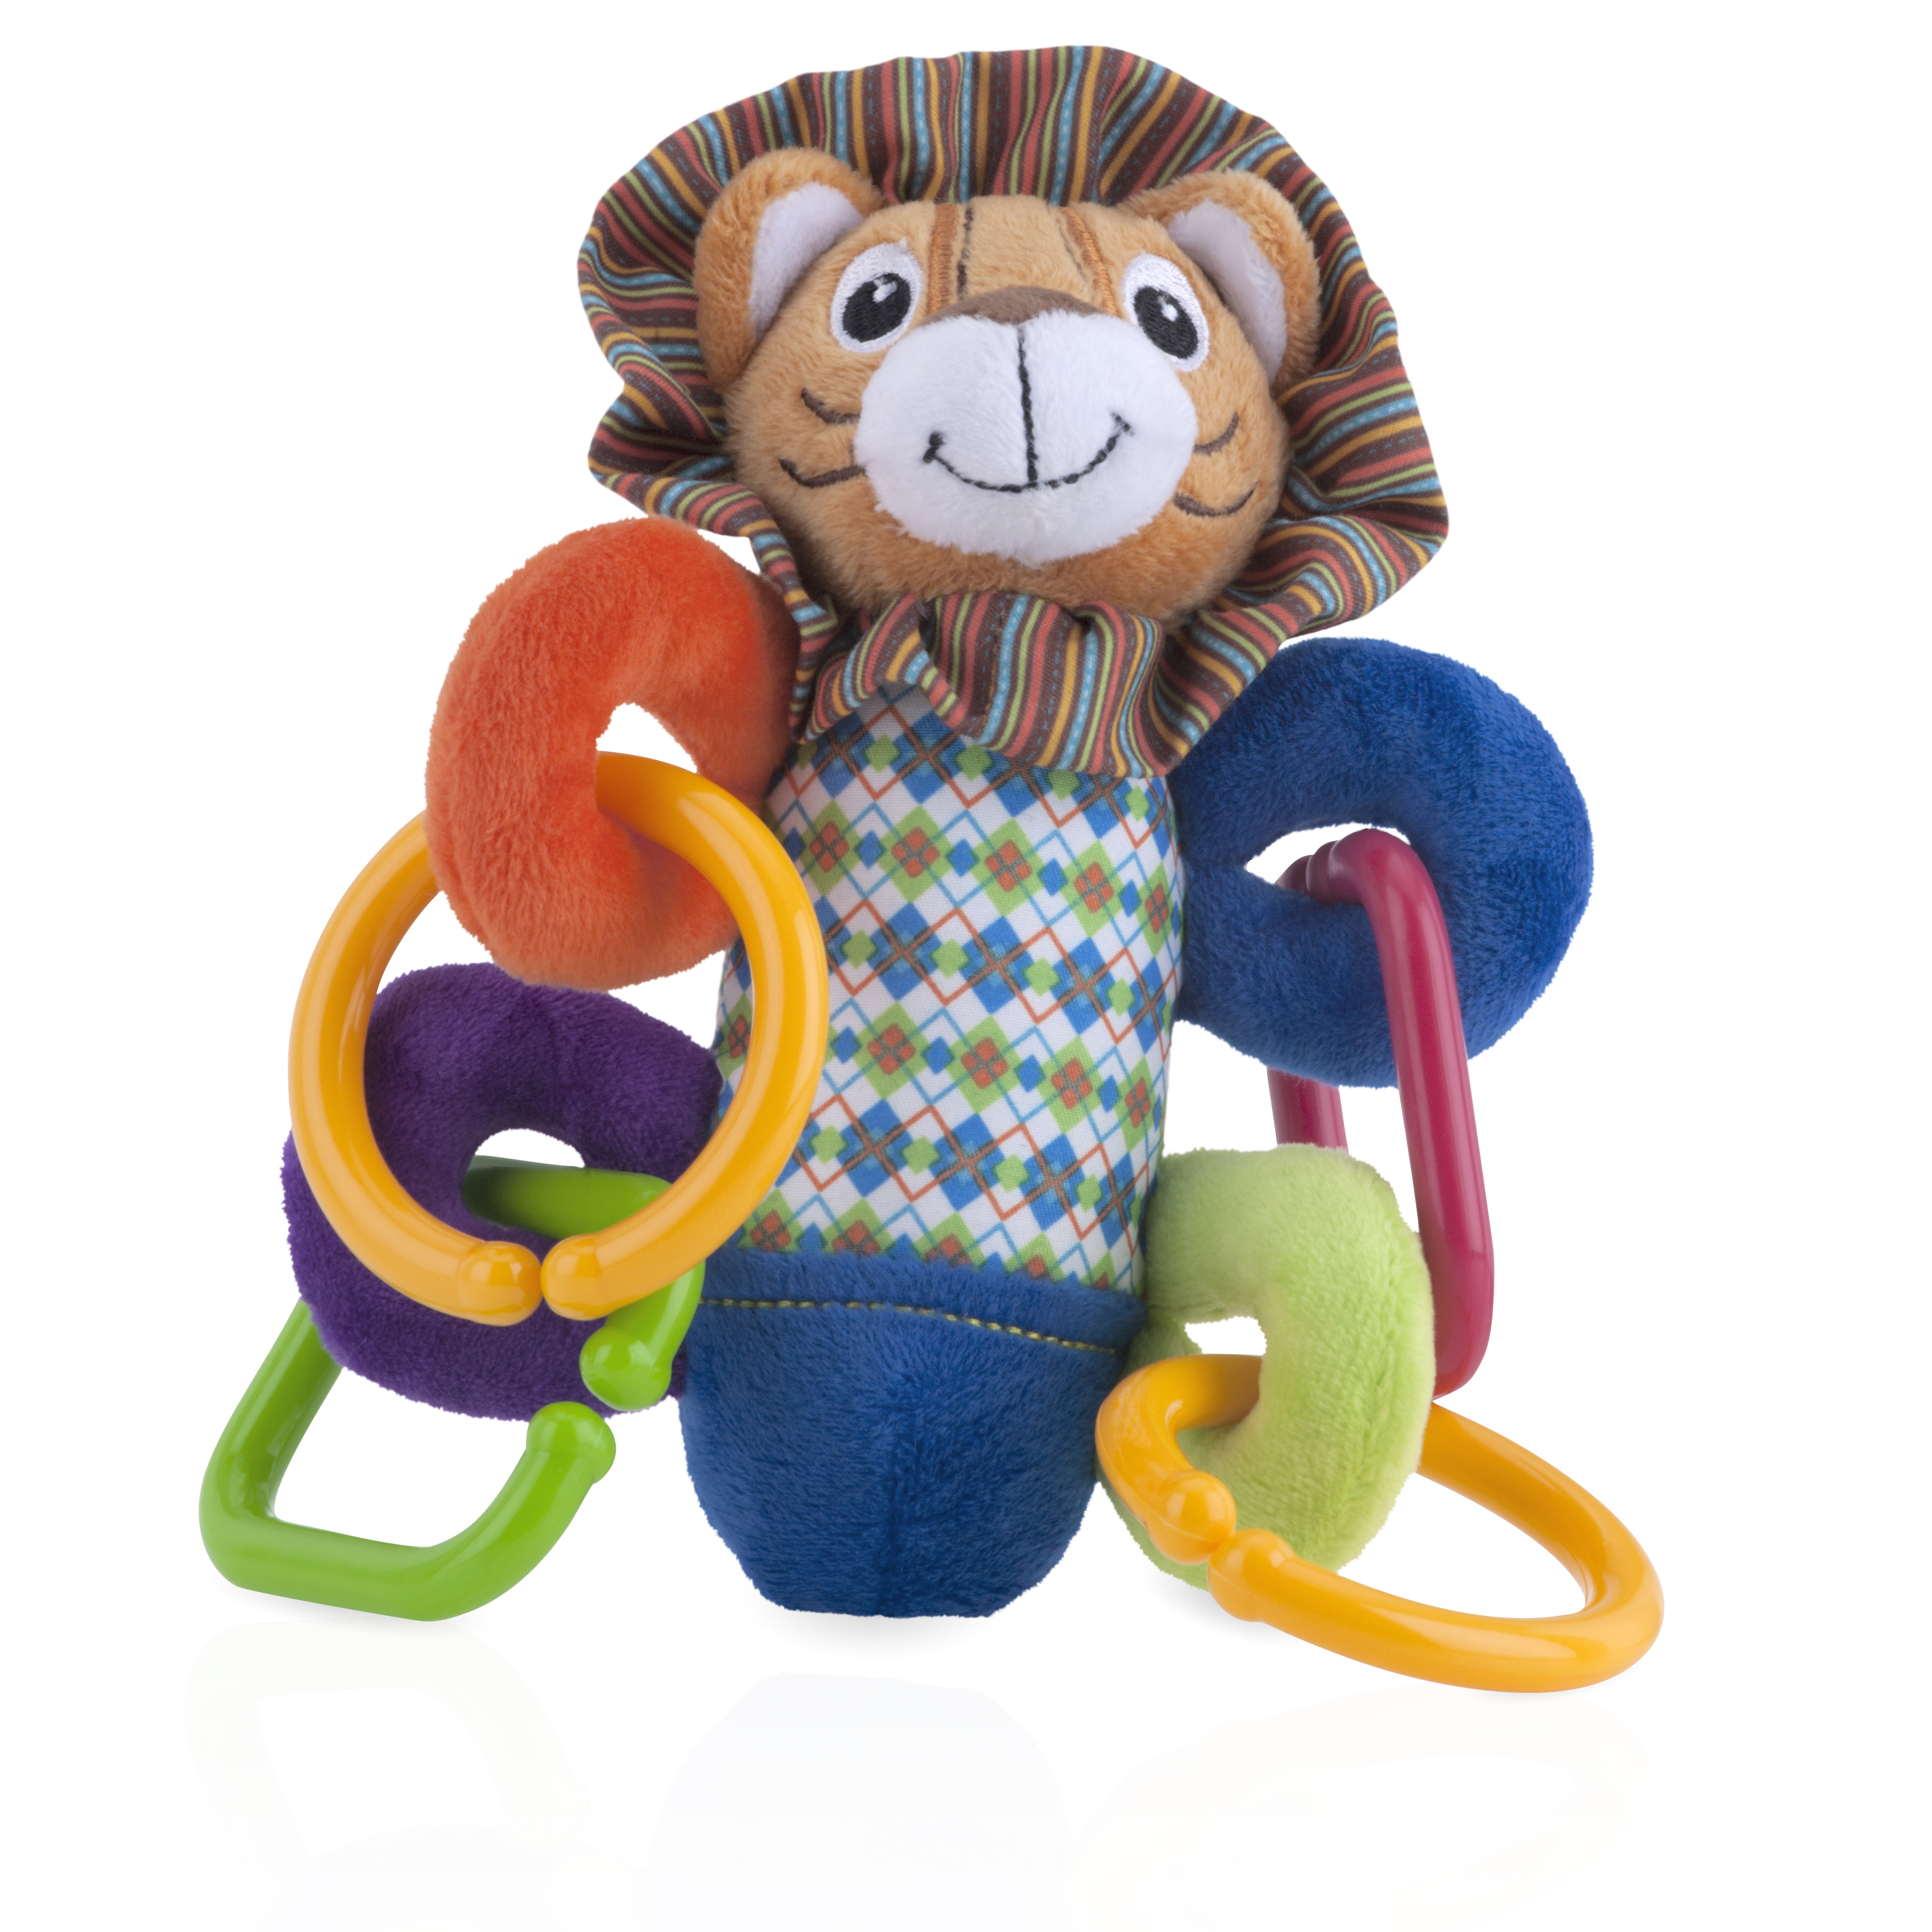 Nuby Squeeze N' Squeak, Styles May Vary - image 2 of 7